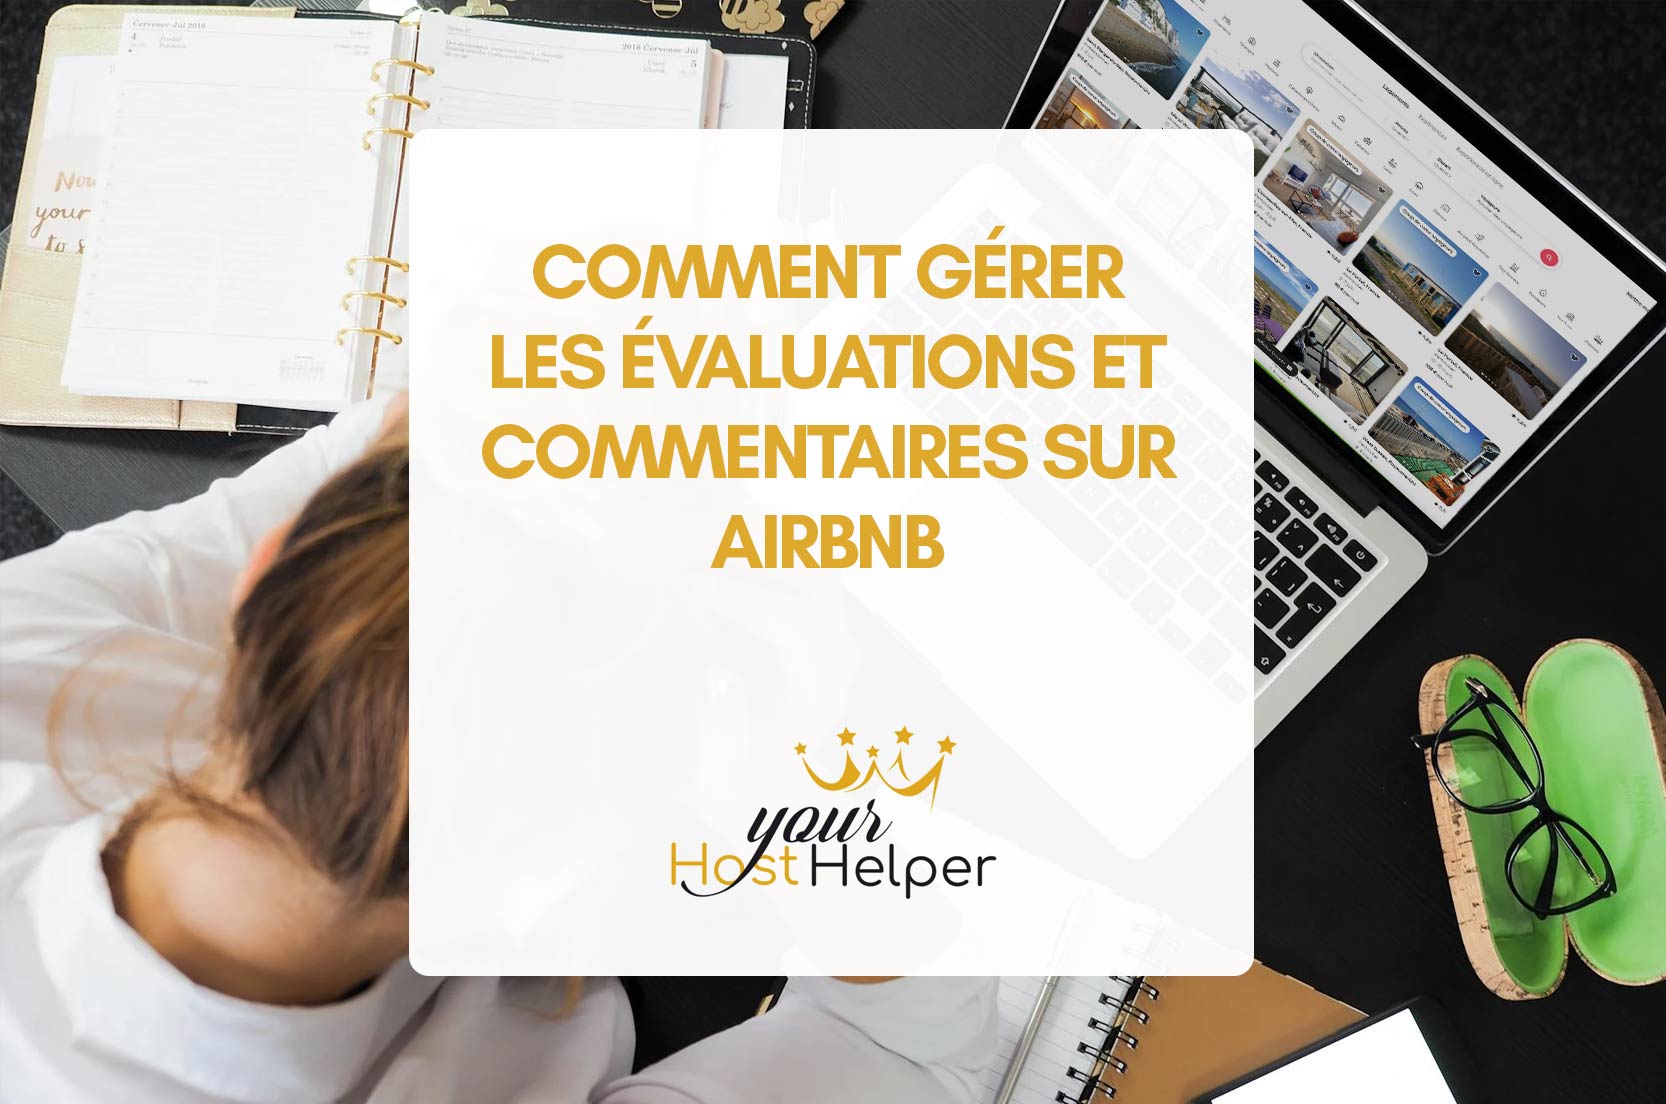 You are currently viewing Complete Guide to Managing Guest Reviews and Ratings on Airbnb